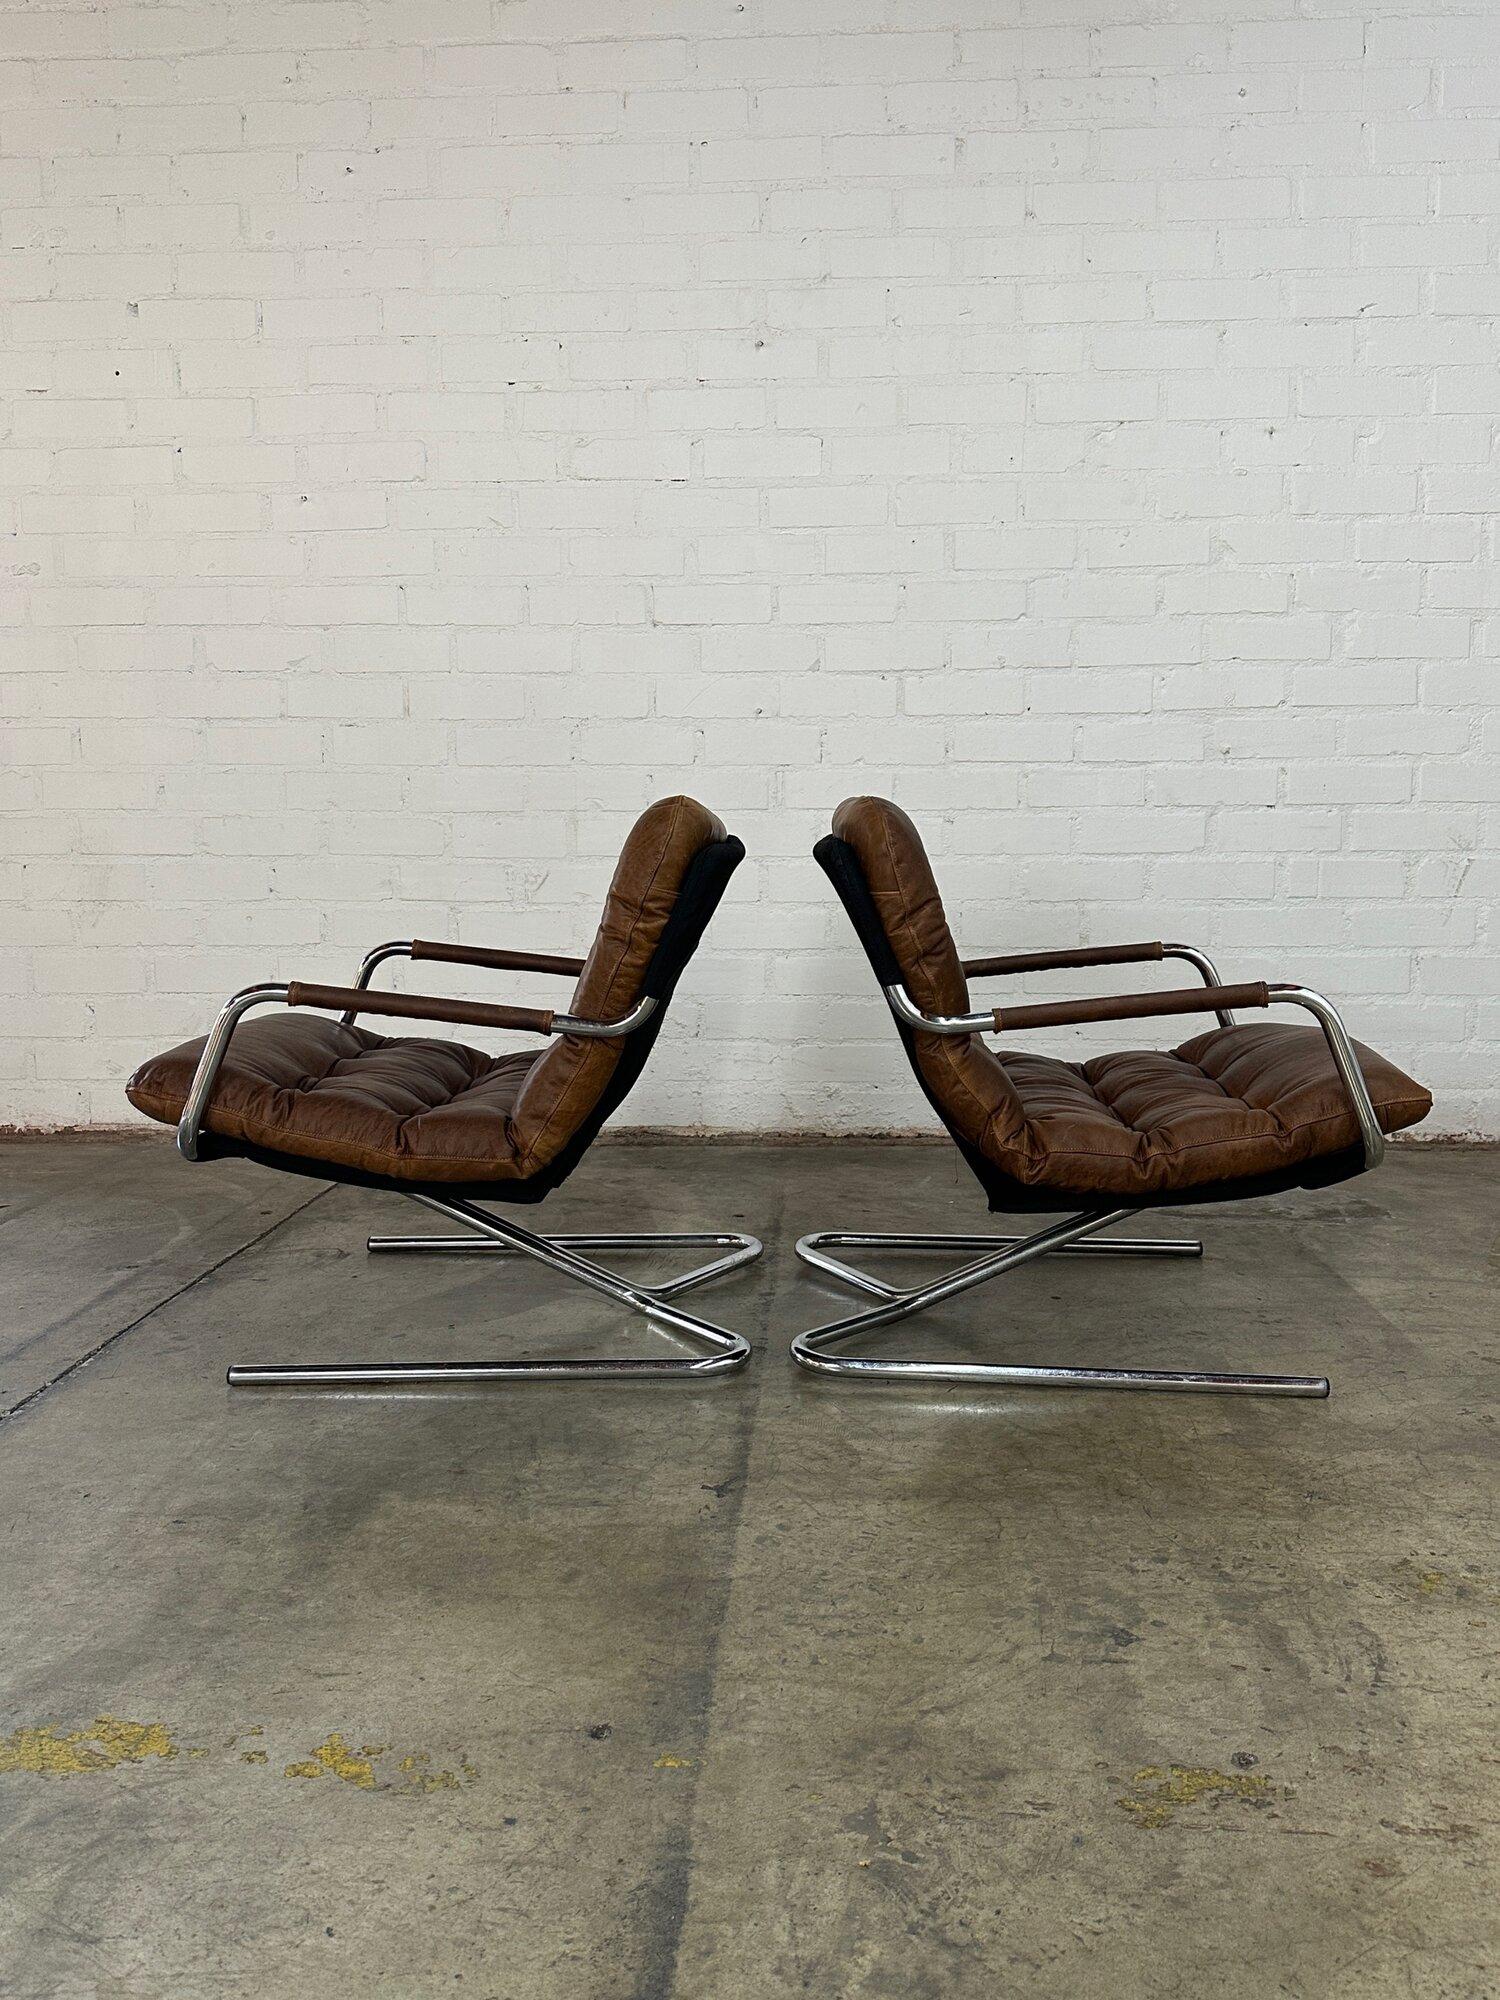 Cantilevered Italian Lounge chairs - sold separately 1